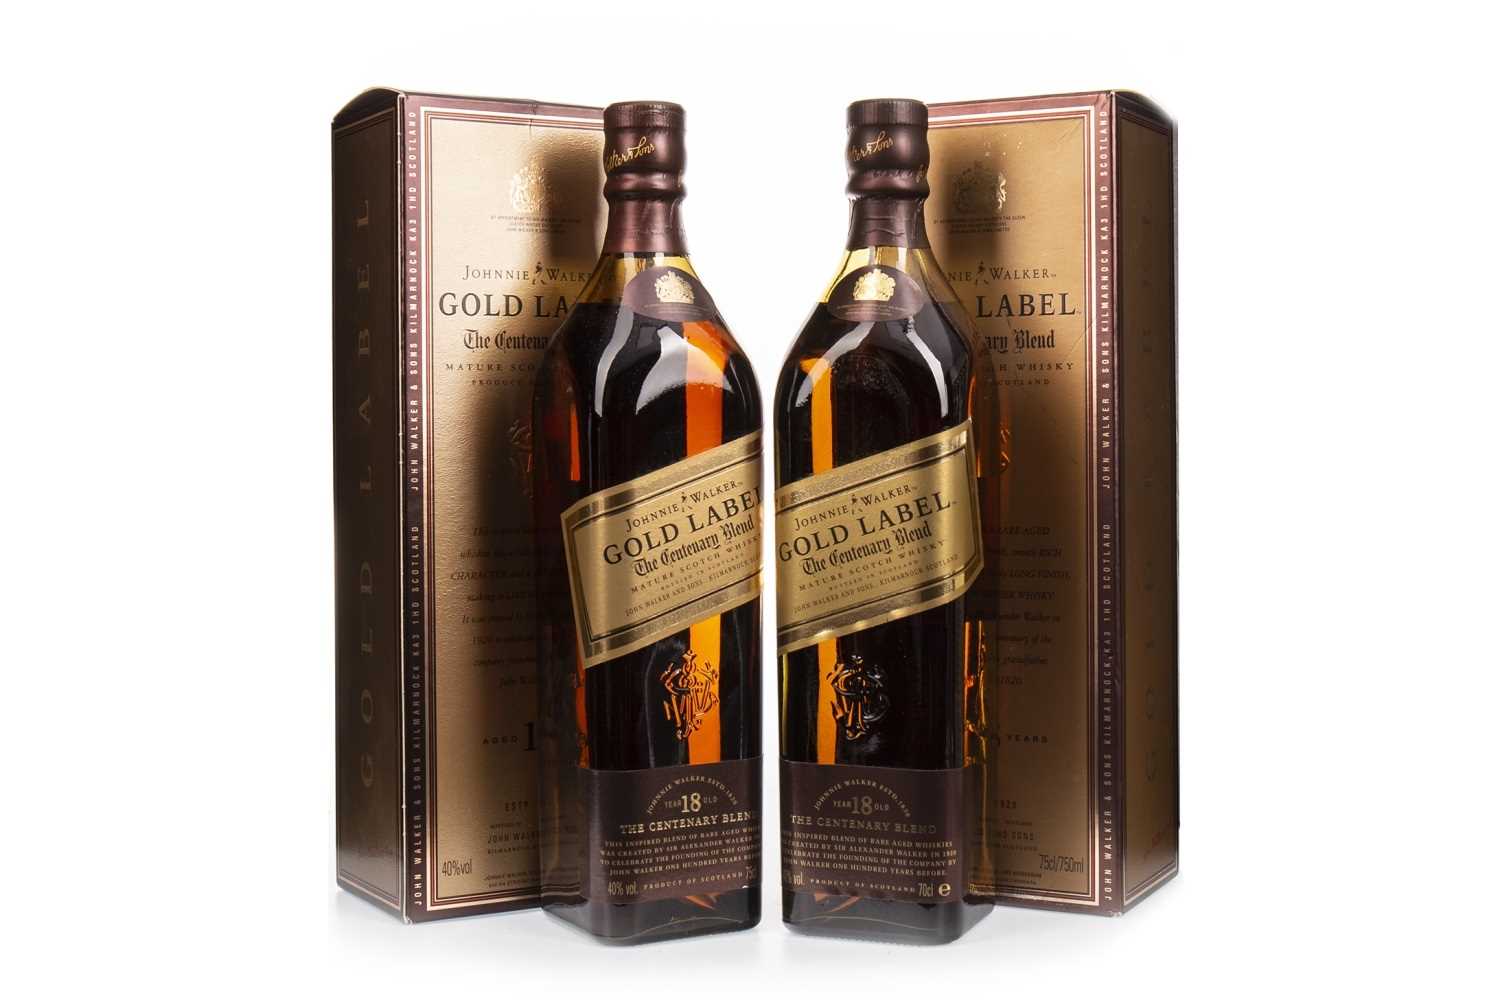 Lot 428 - TWO BOTTLES OF JOHNNIE WALKER GOLD LABEL CENTENARY BLEND AGED 18 YEARS